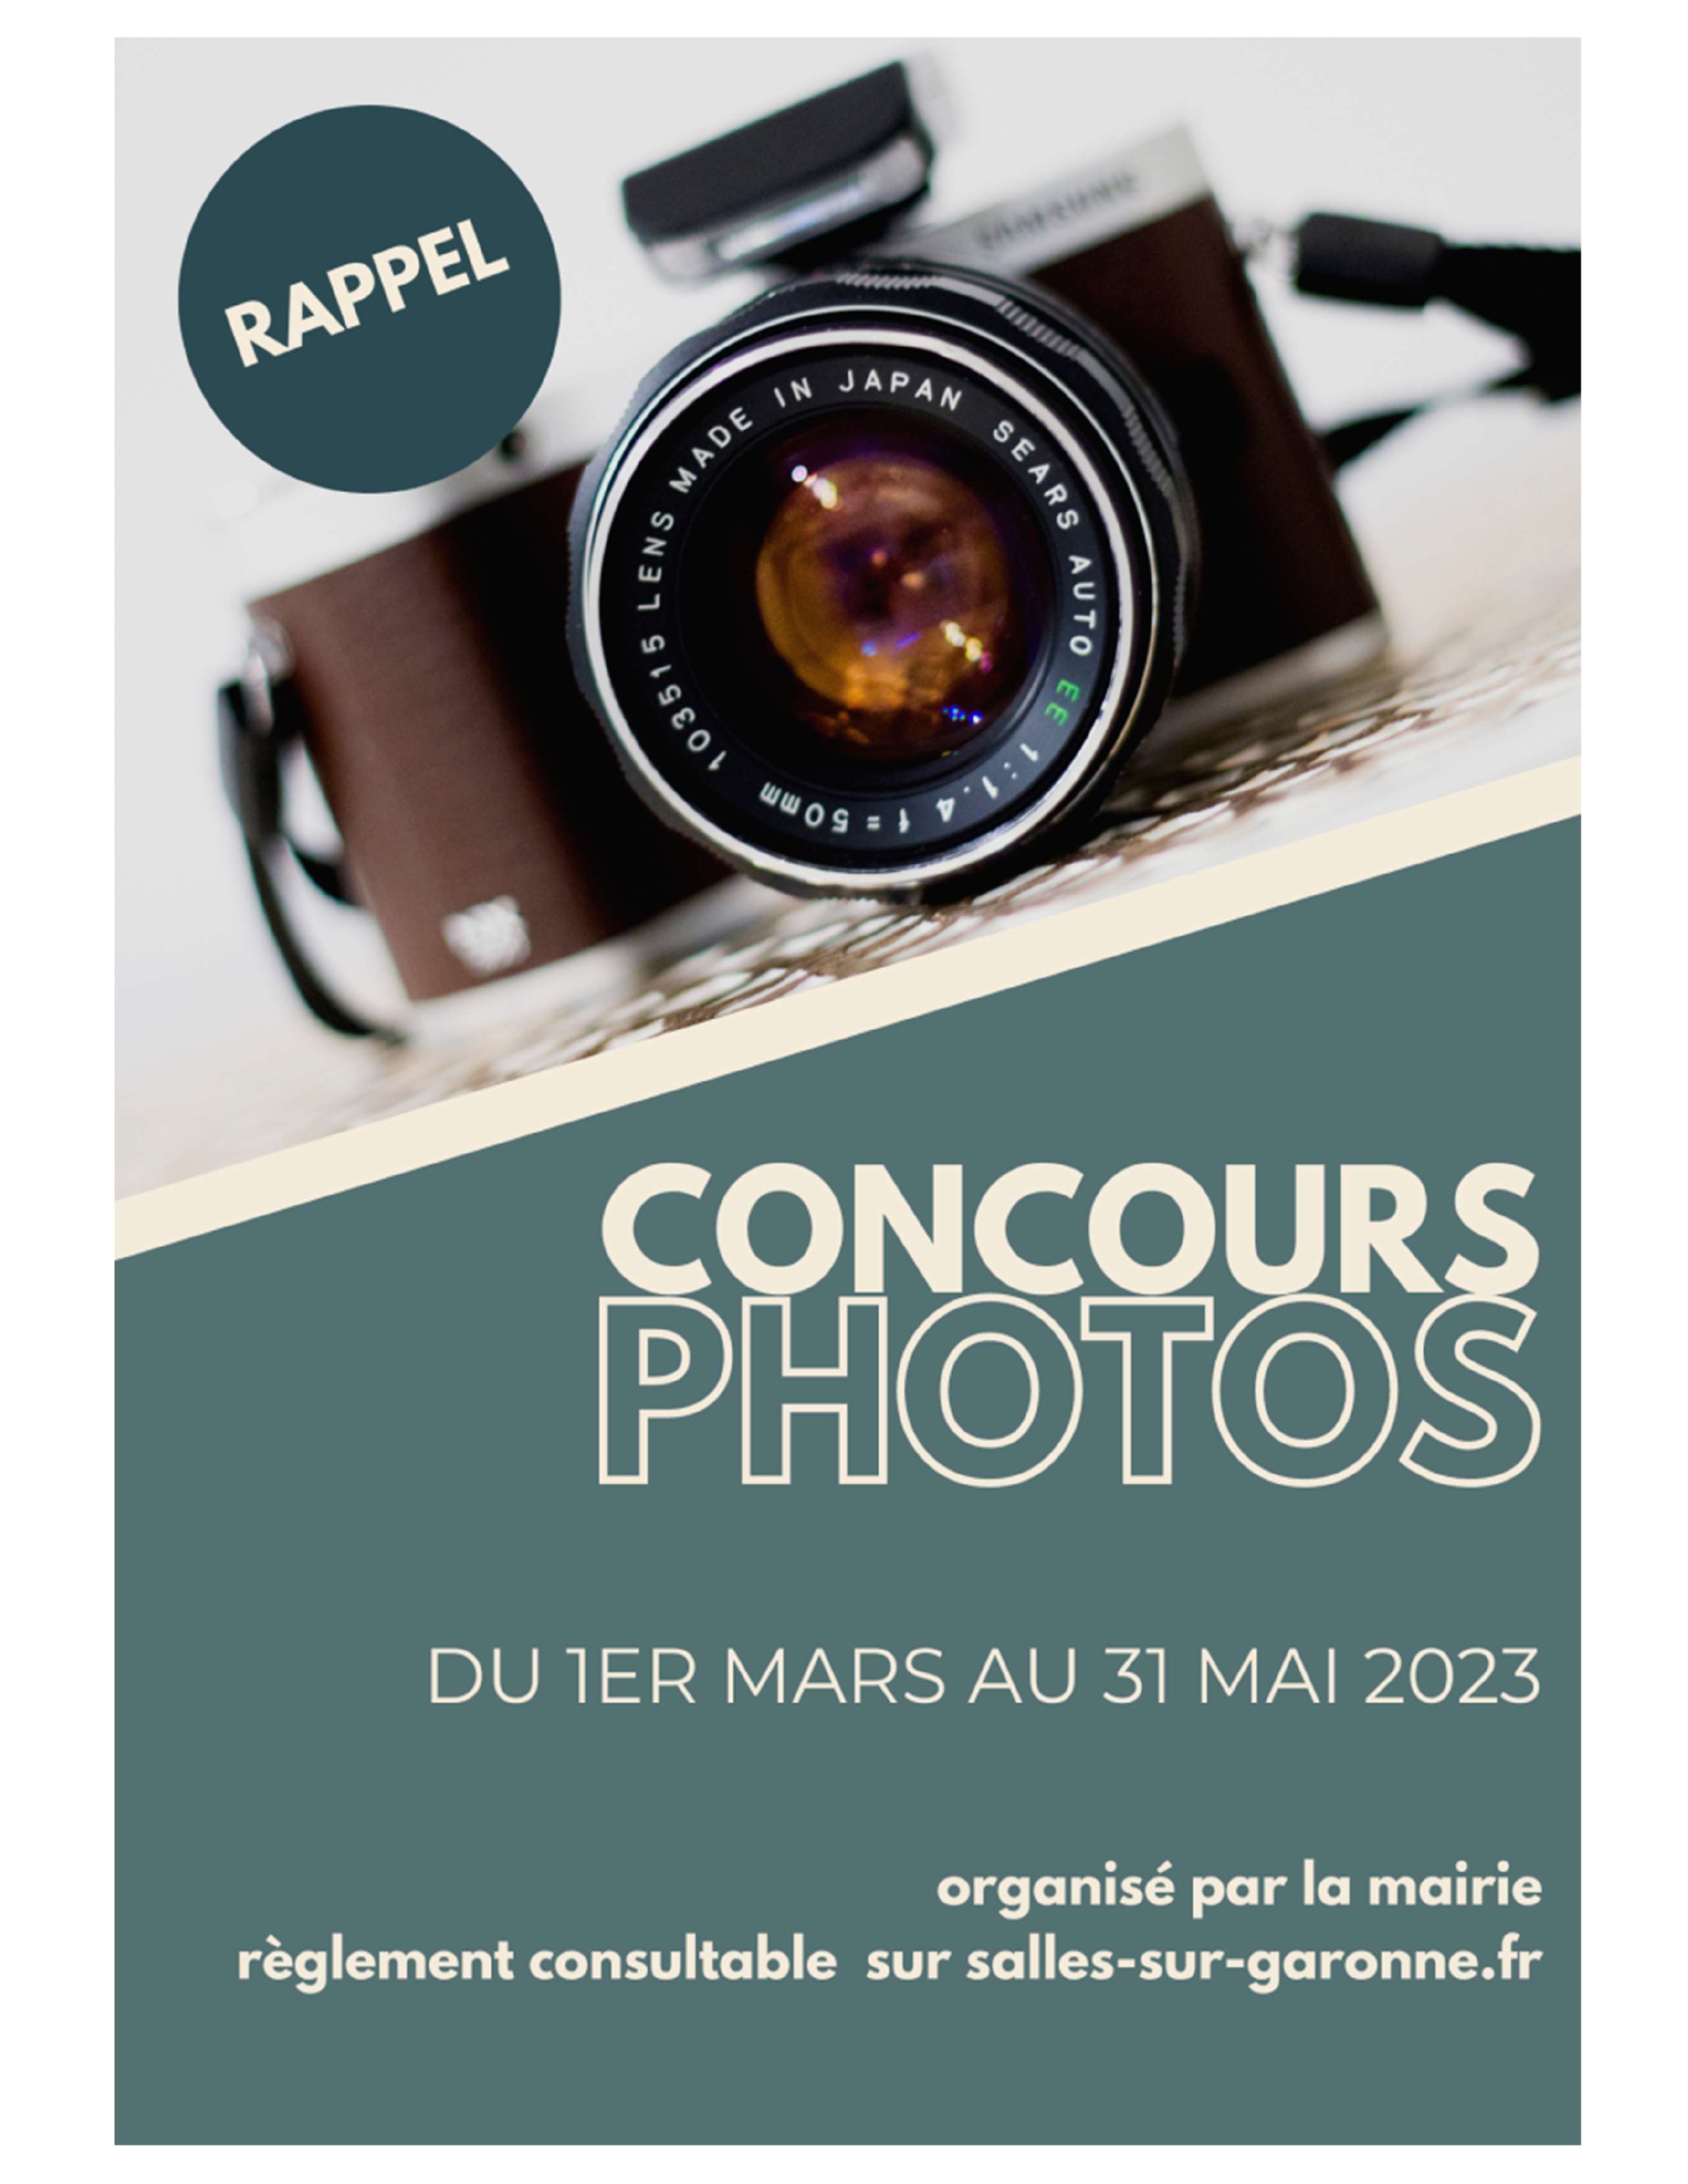 flyers concours photos pages to jpg 0001